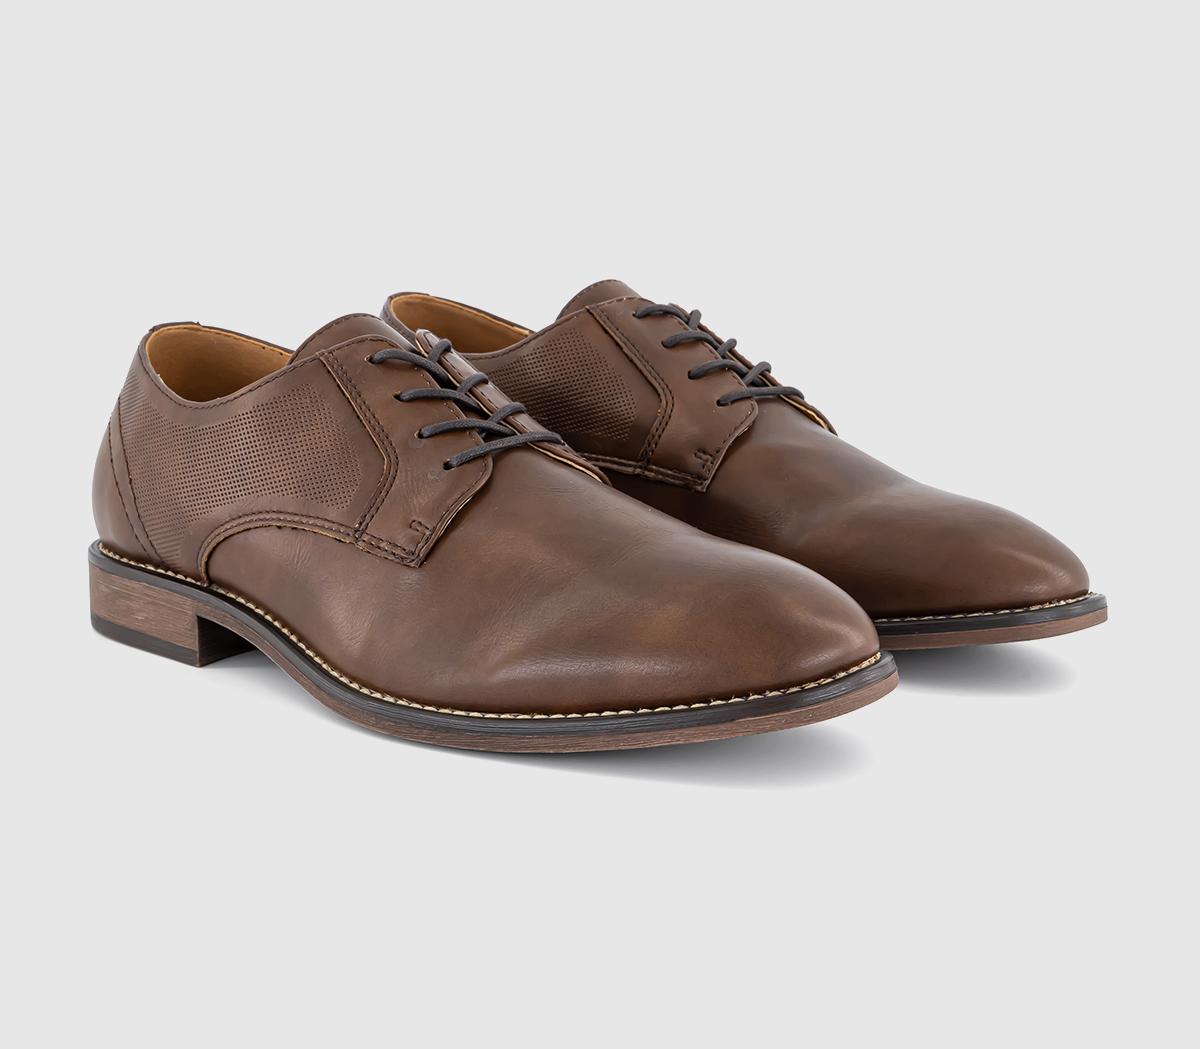 OFFICE Mens Claydon Smart Derby Shoes Brown, 10